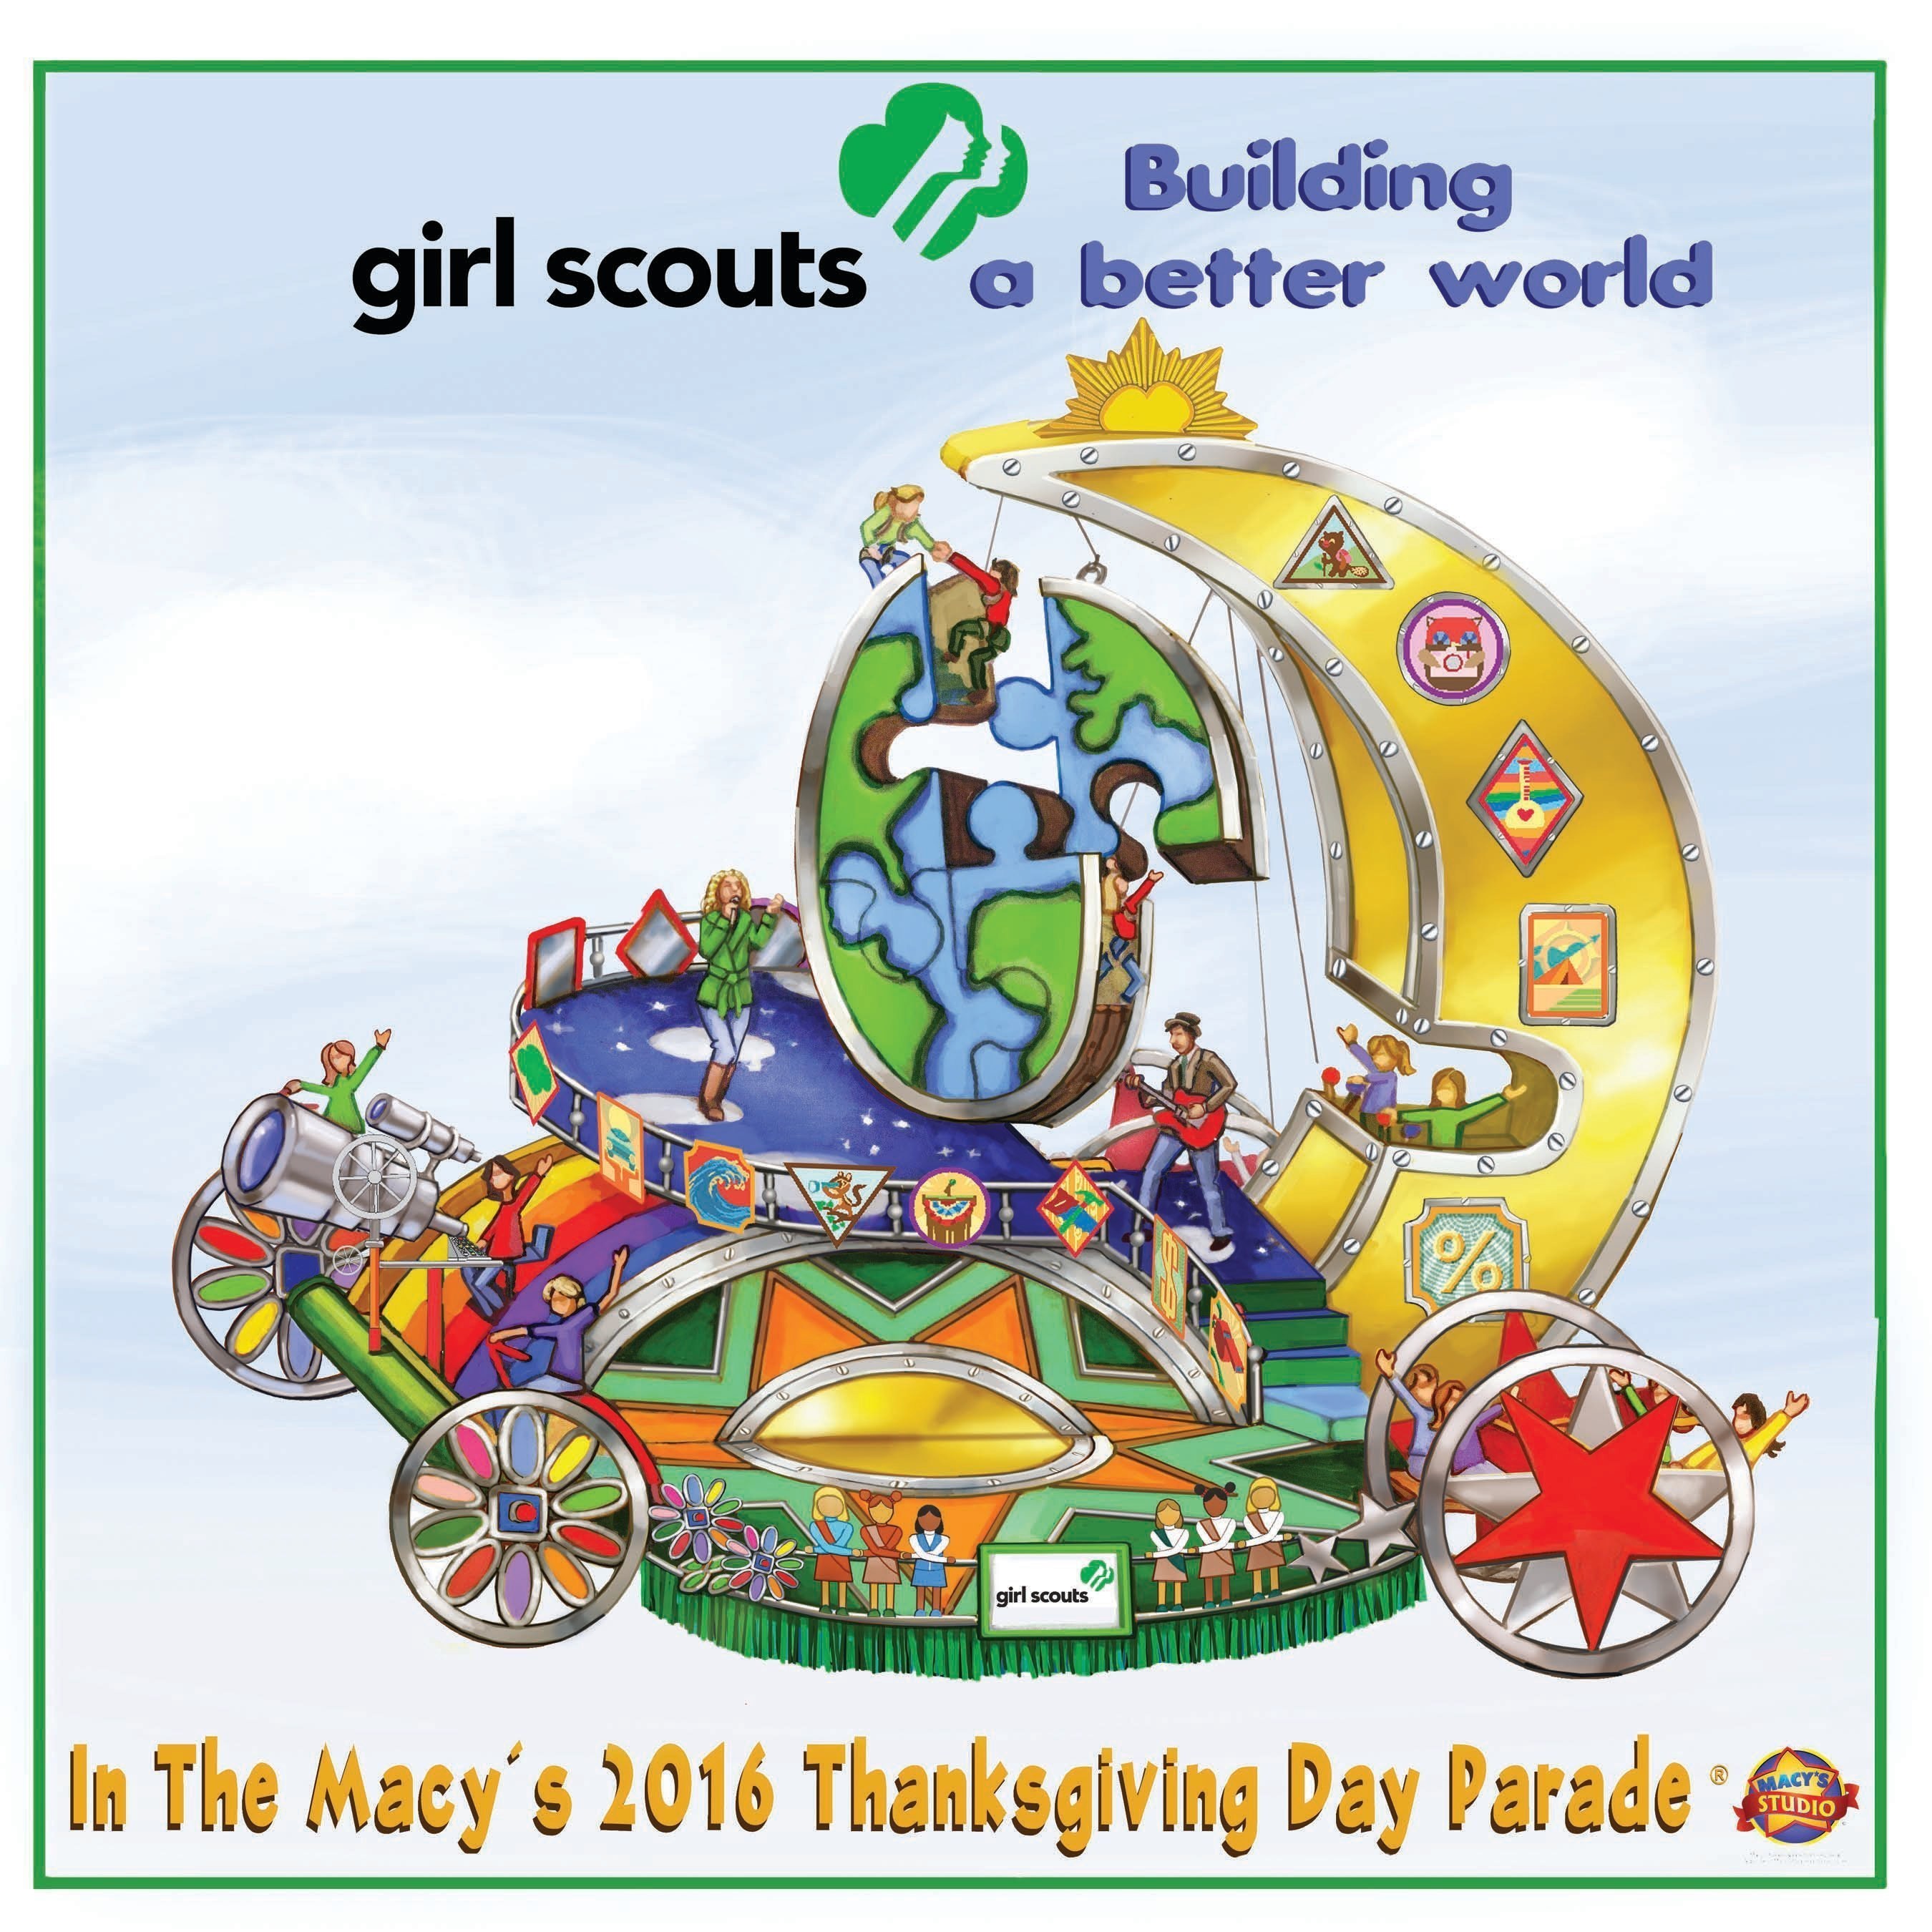 To spotlight how Girl Scouts are "building a better world," the float concept showcases girls climbing and belaying on giant 3-D puzzle pieces of the globe, while others are steering mechanics to help connect the pieces and propel the world forward.